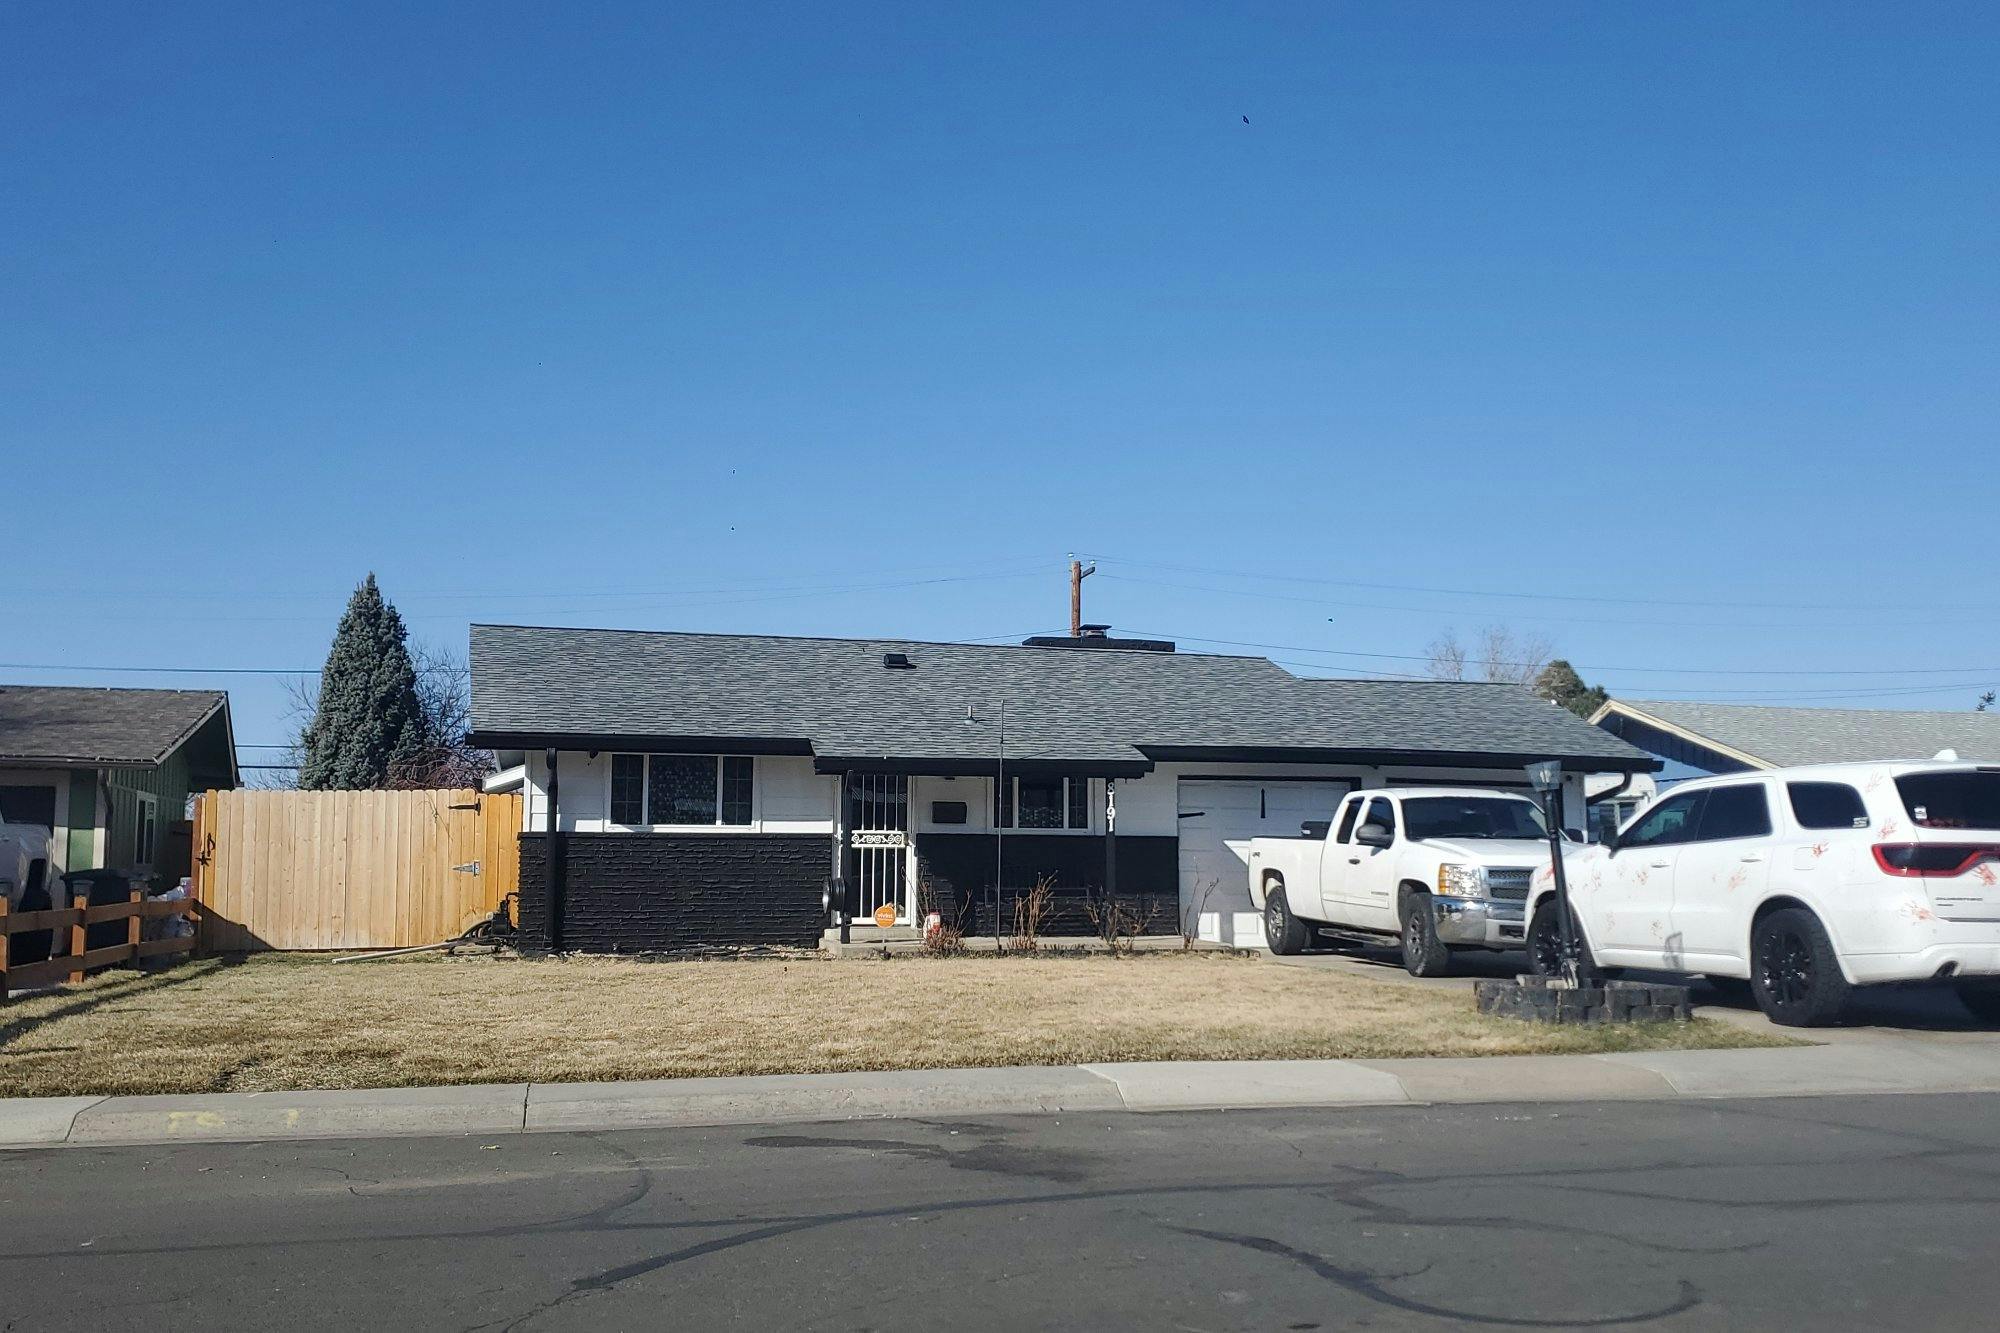 Tennyson St, Westminster, CO 80031 #1